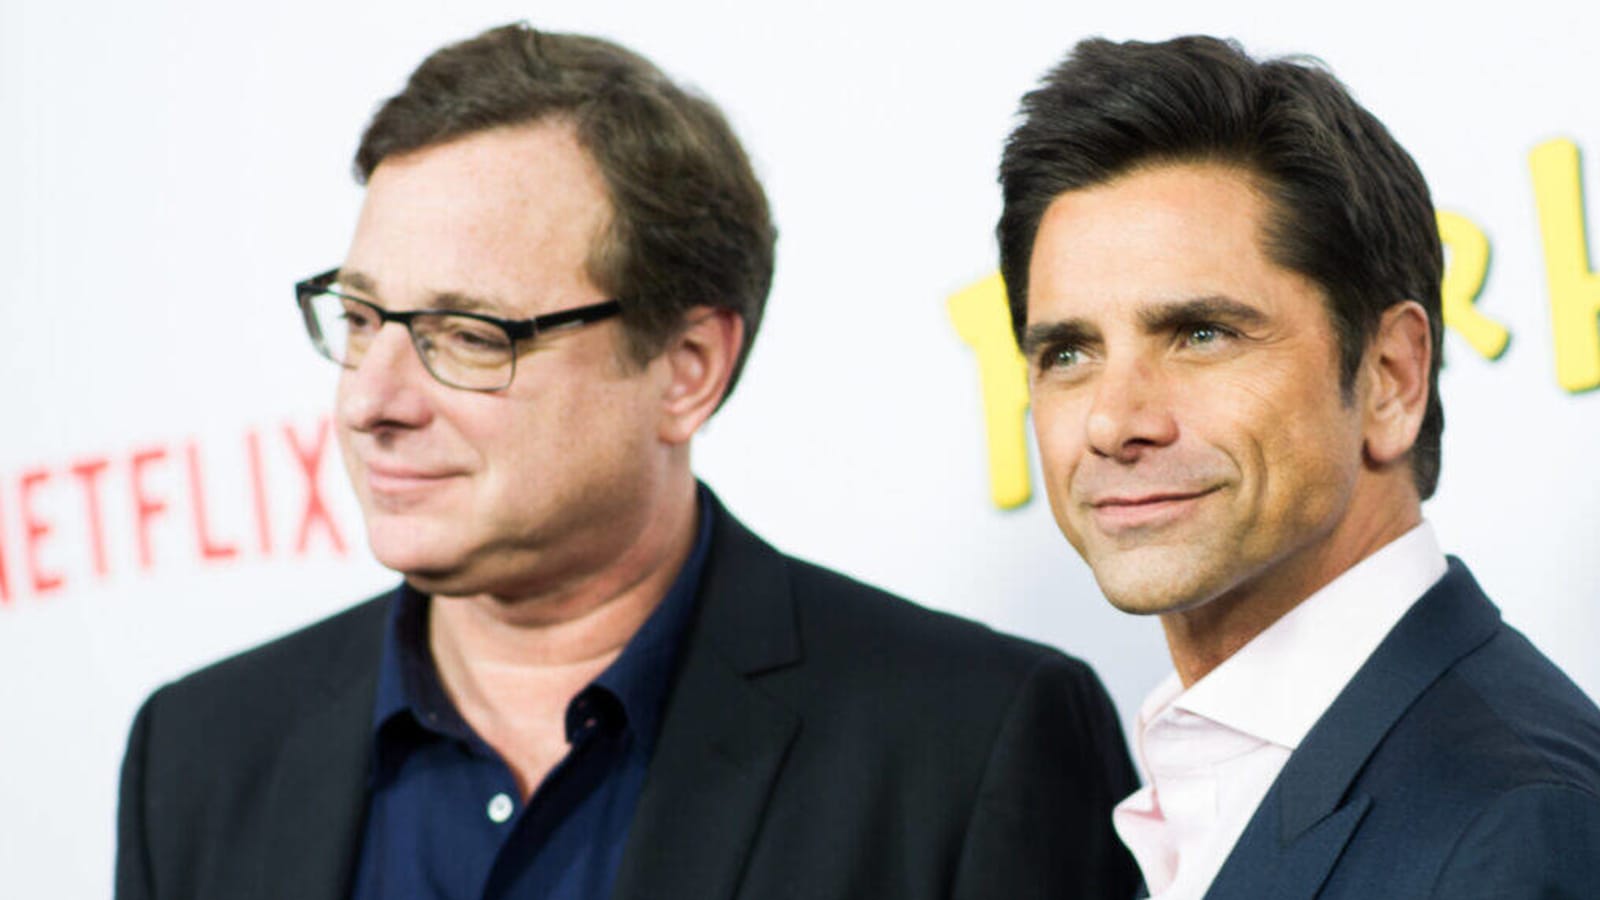 John Stamos Marks Bob Saget’s Birthday With Pic of ‘Full House’ Cast Reunion, Olsens Included